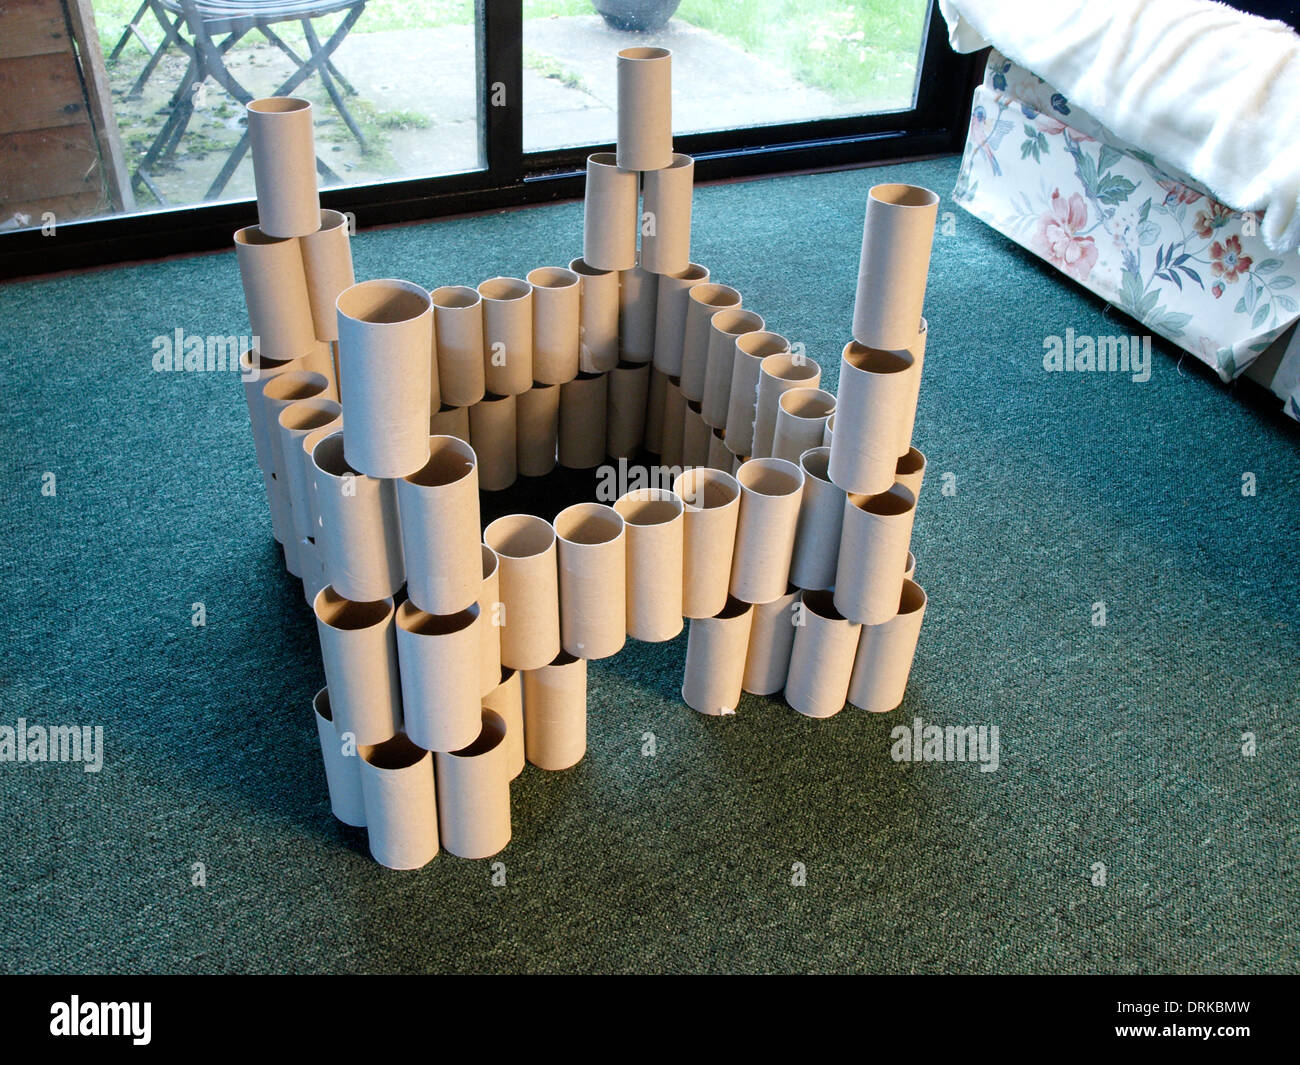 Child's fort made from inner tubes from toilet rolls Stock Photo